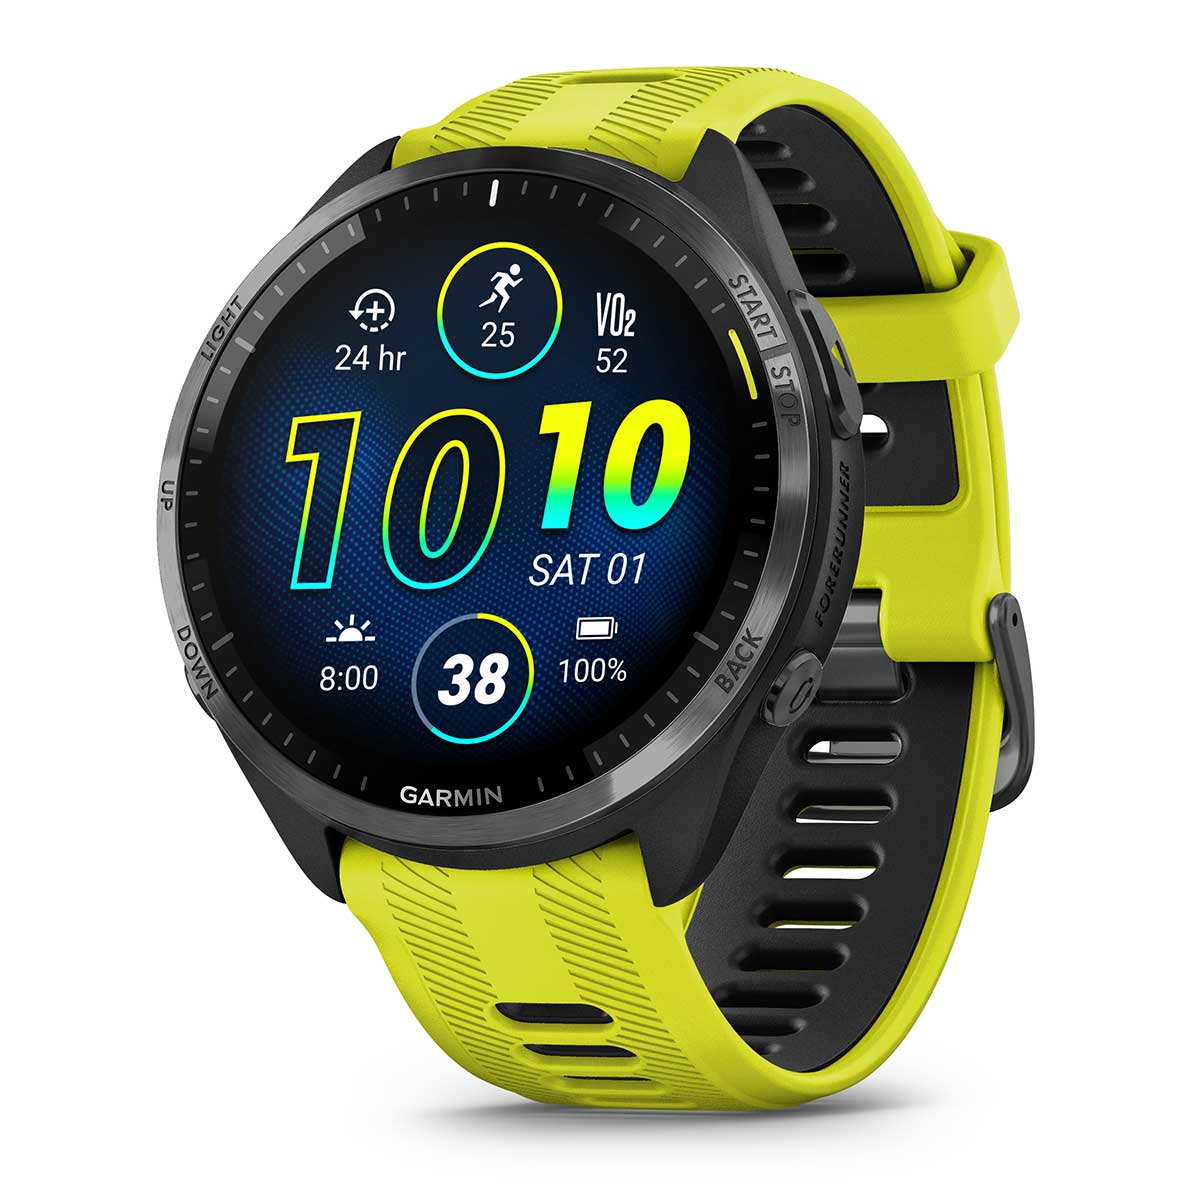 Garmin Forerunner 965 (Amp Yellow/Black) Premium Running GPS Smartwatch | Gift Box with PlayBetter HD Screen Protectors, Wall Adapter & Case - image 2 of 7